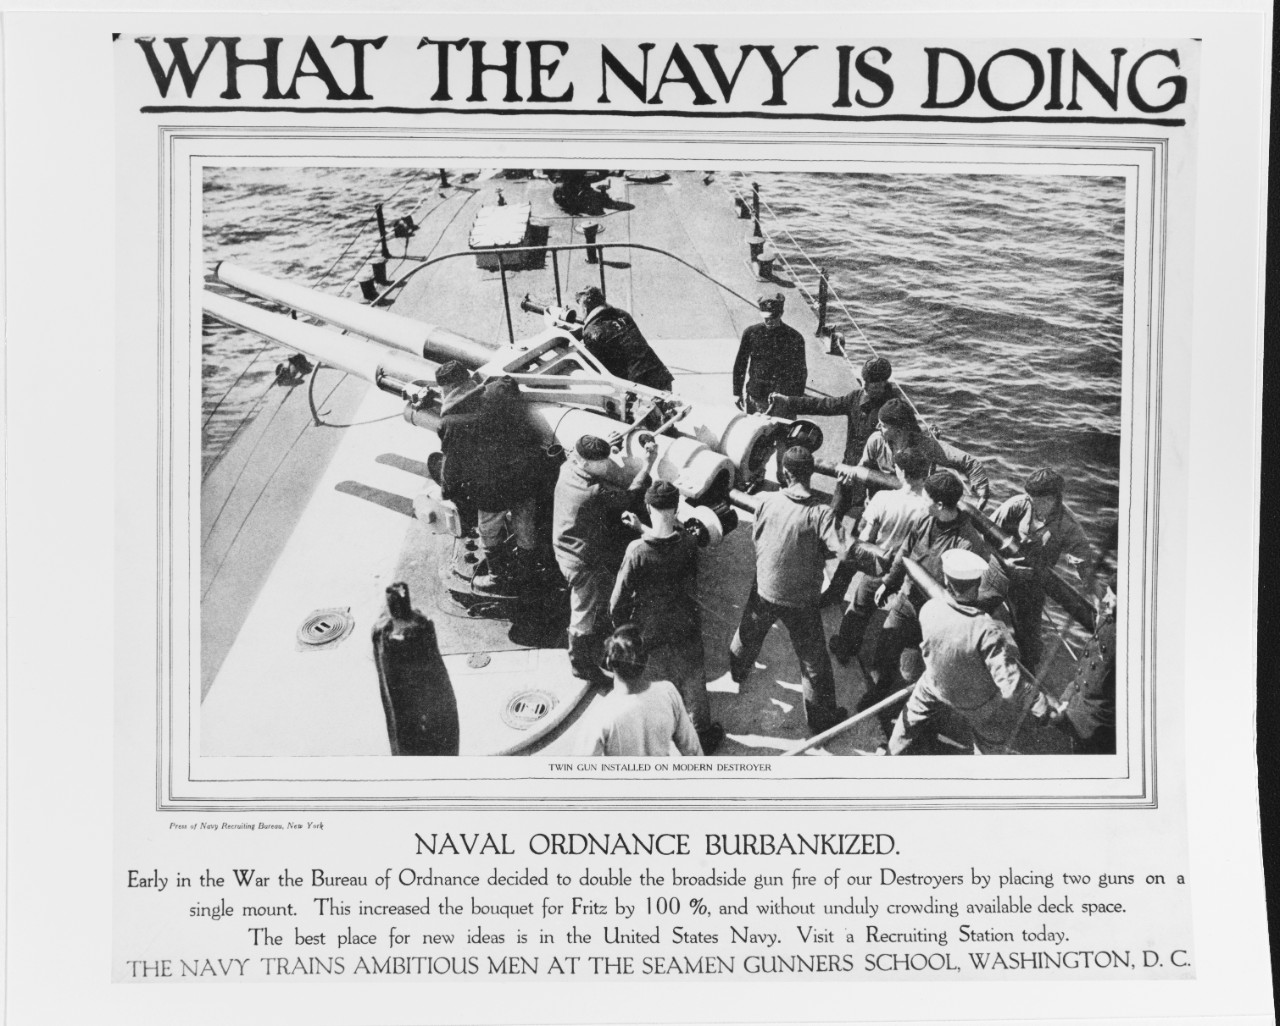 Recruiting Poster: What the Navy is Doing: Naval Ordnance Burbankized